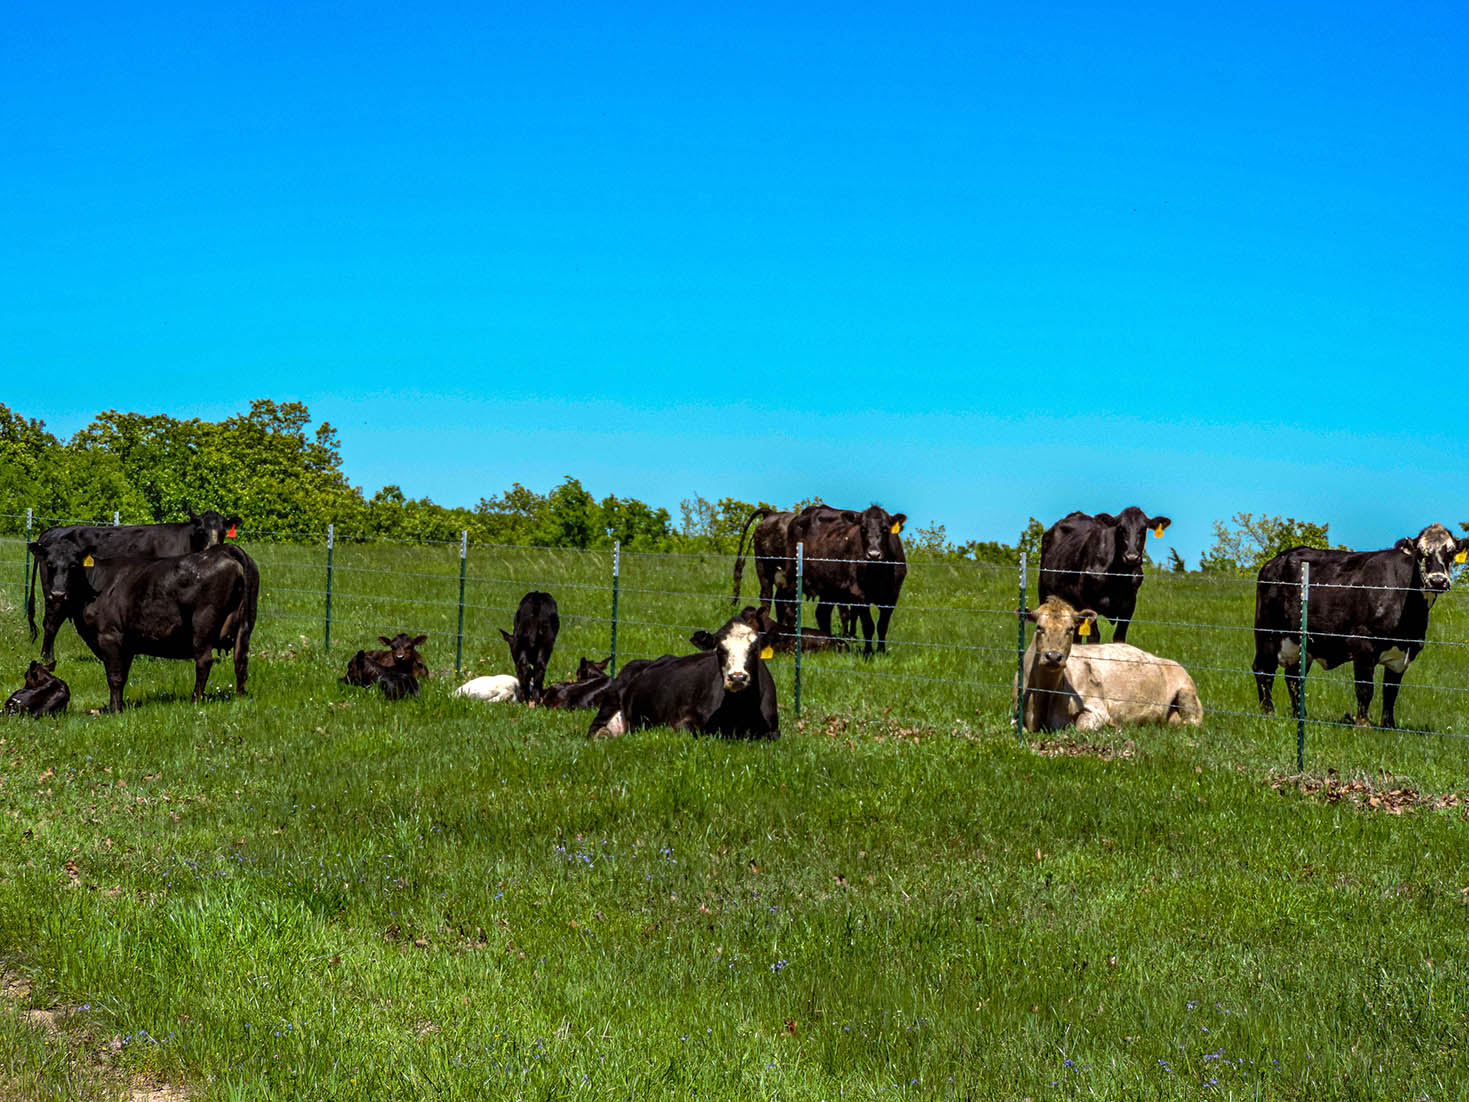 Cows on Oklahoma ranch for sale.